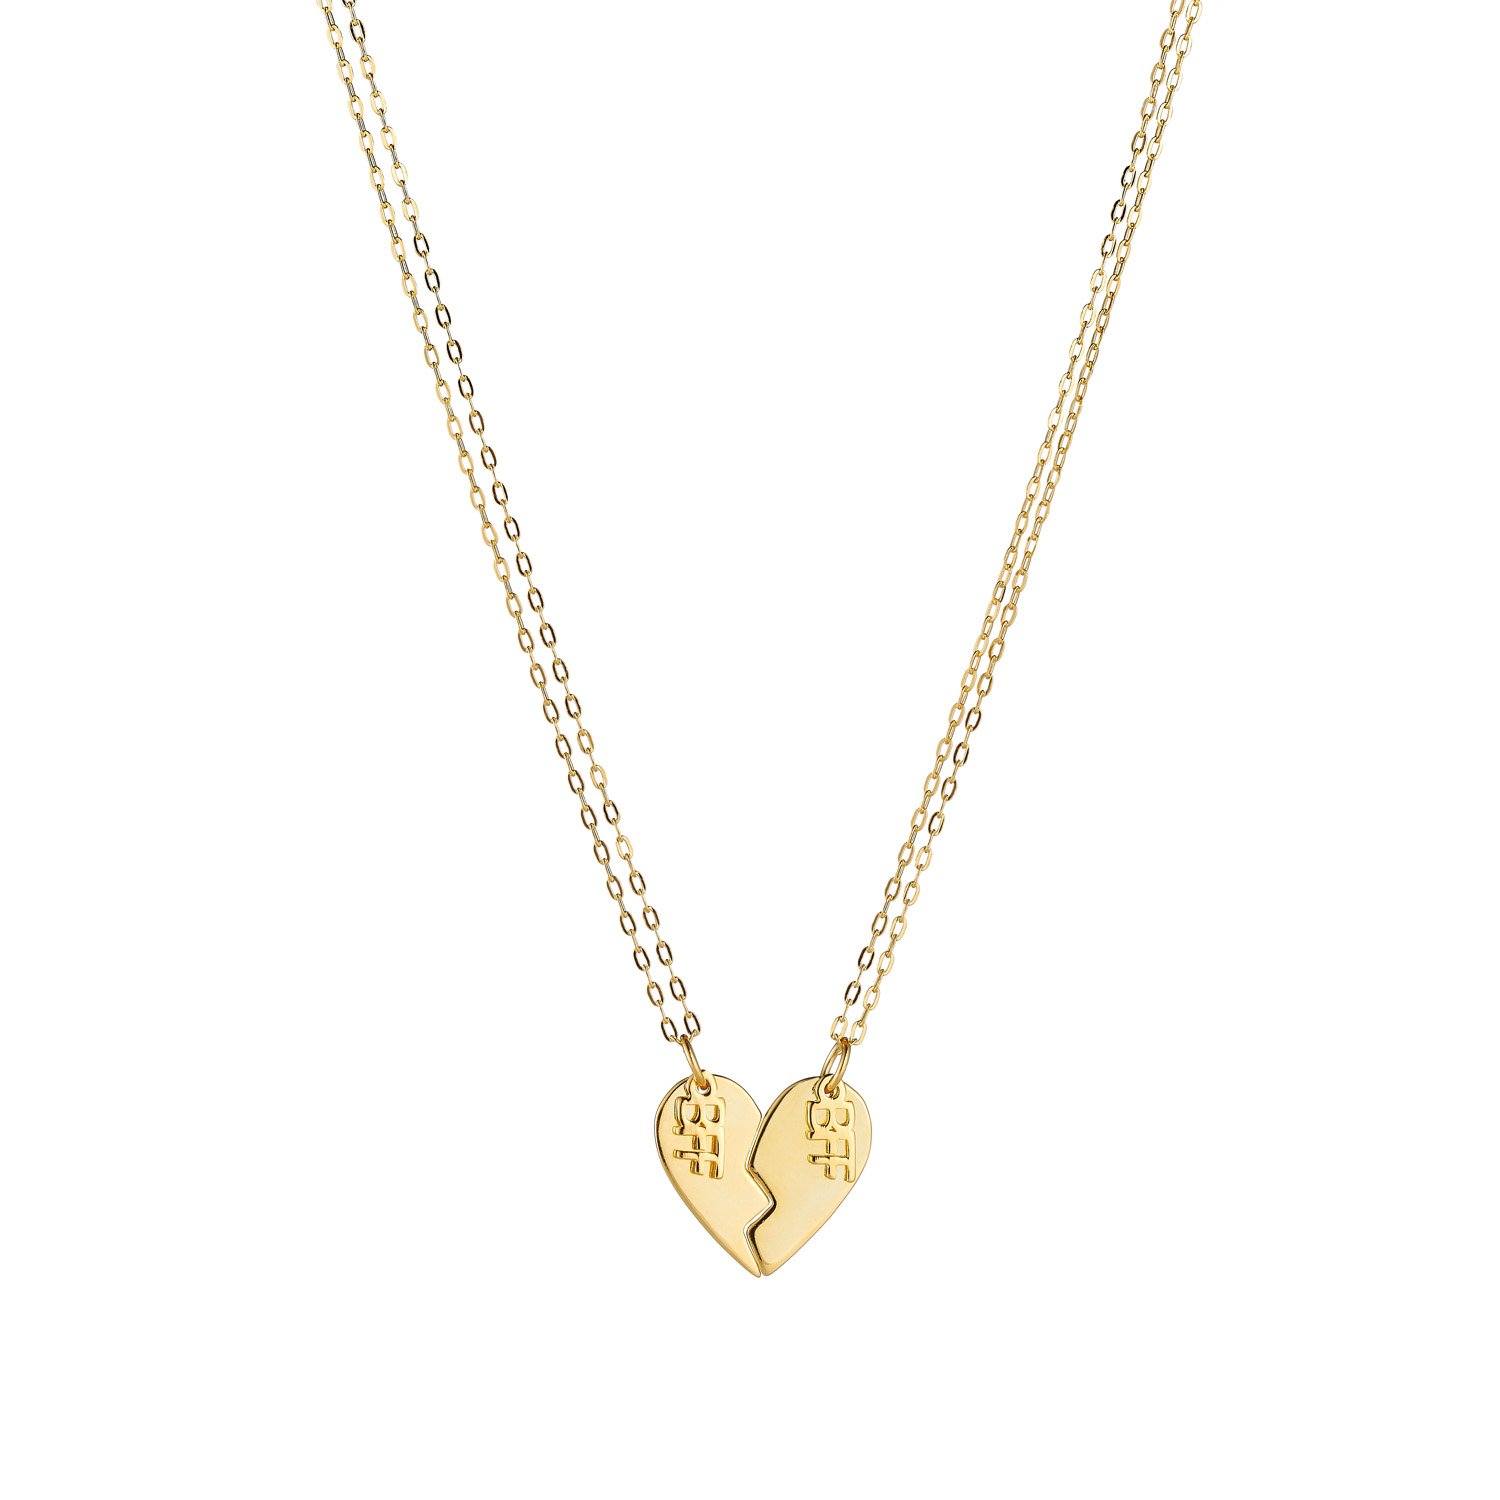 Product image of a pair of sterling silver best friend necklaces, with 14k gold plating, that when put together, make the shape of a heart. Each side of the heart has a charm attached with the word 'BFF'.